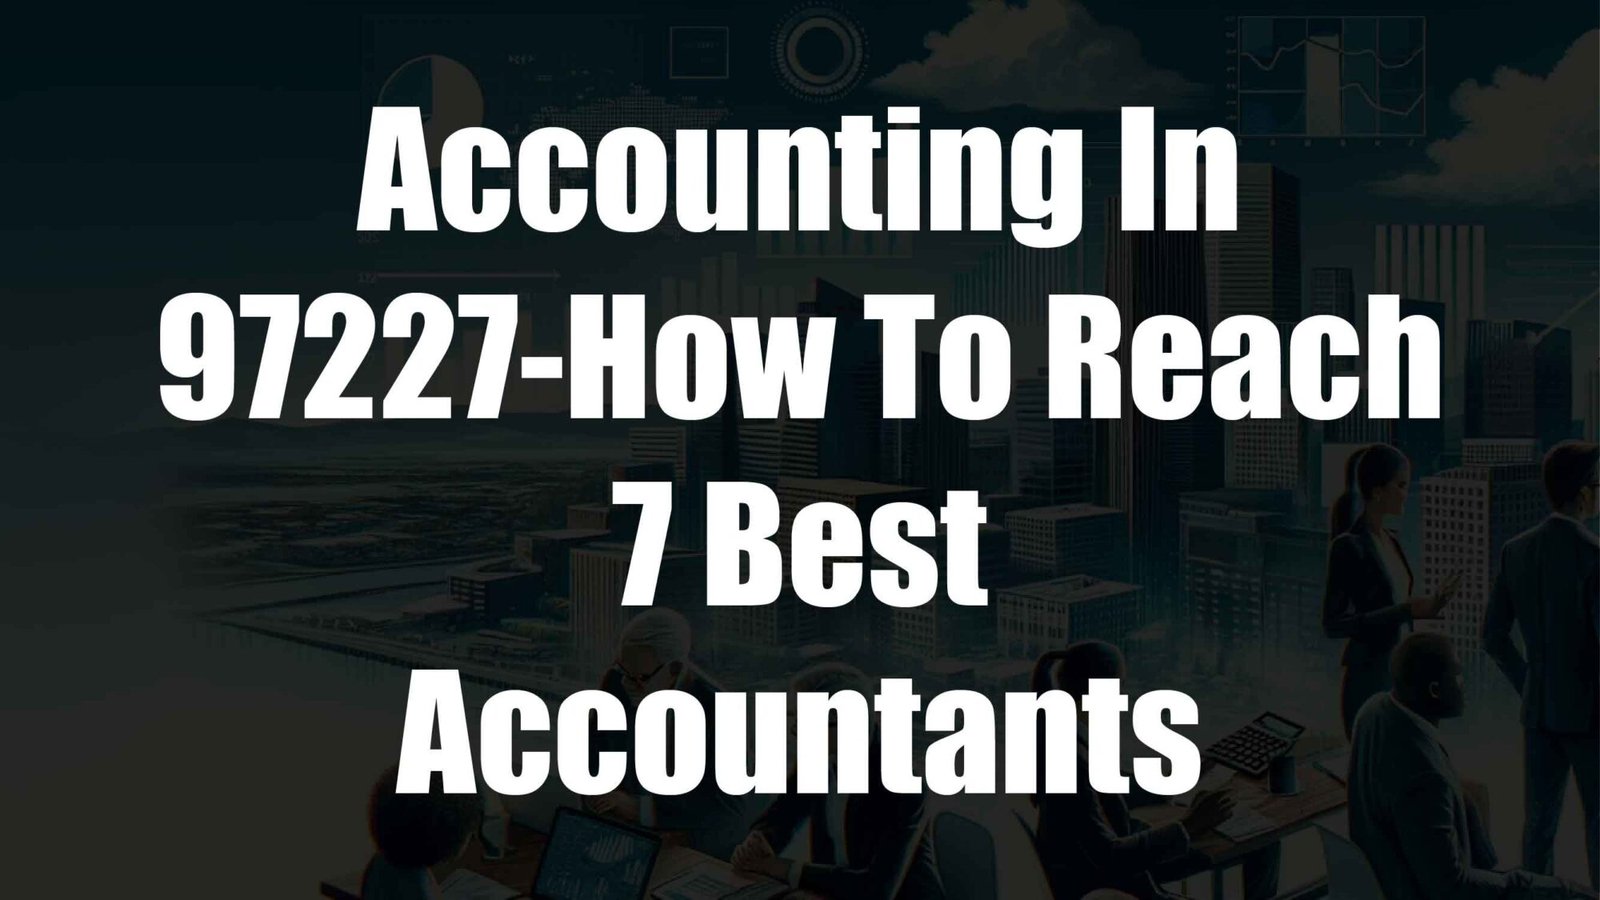 Accounting In 97227-How To Reach 7 Best Accountants